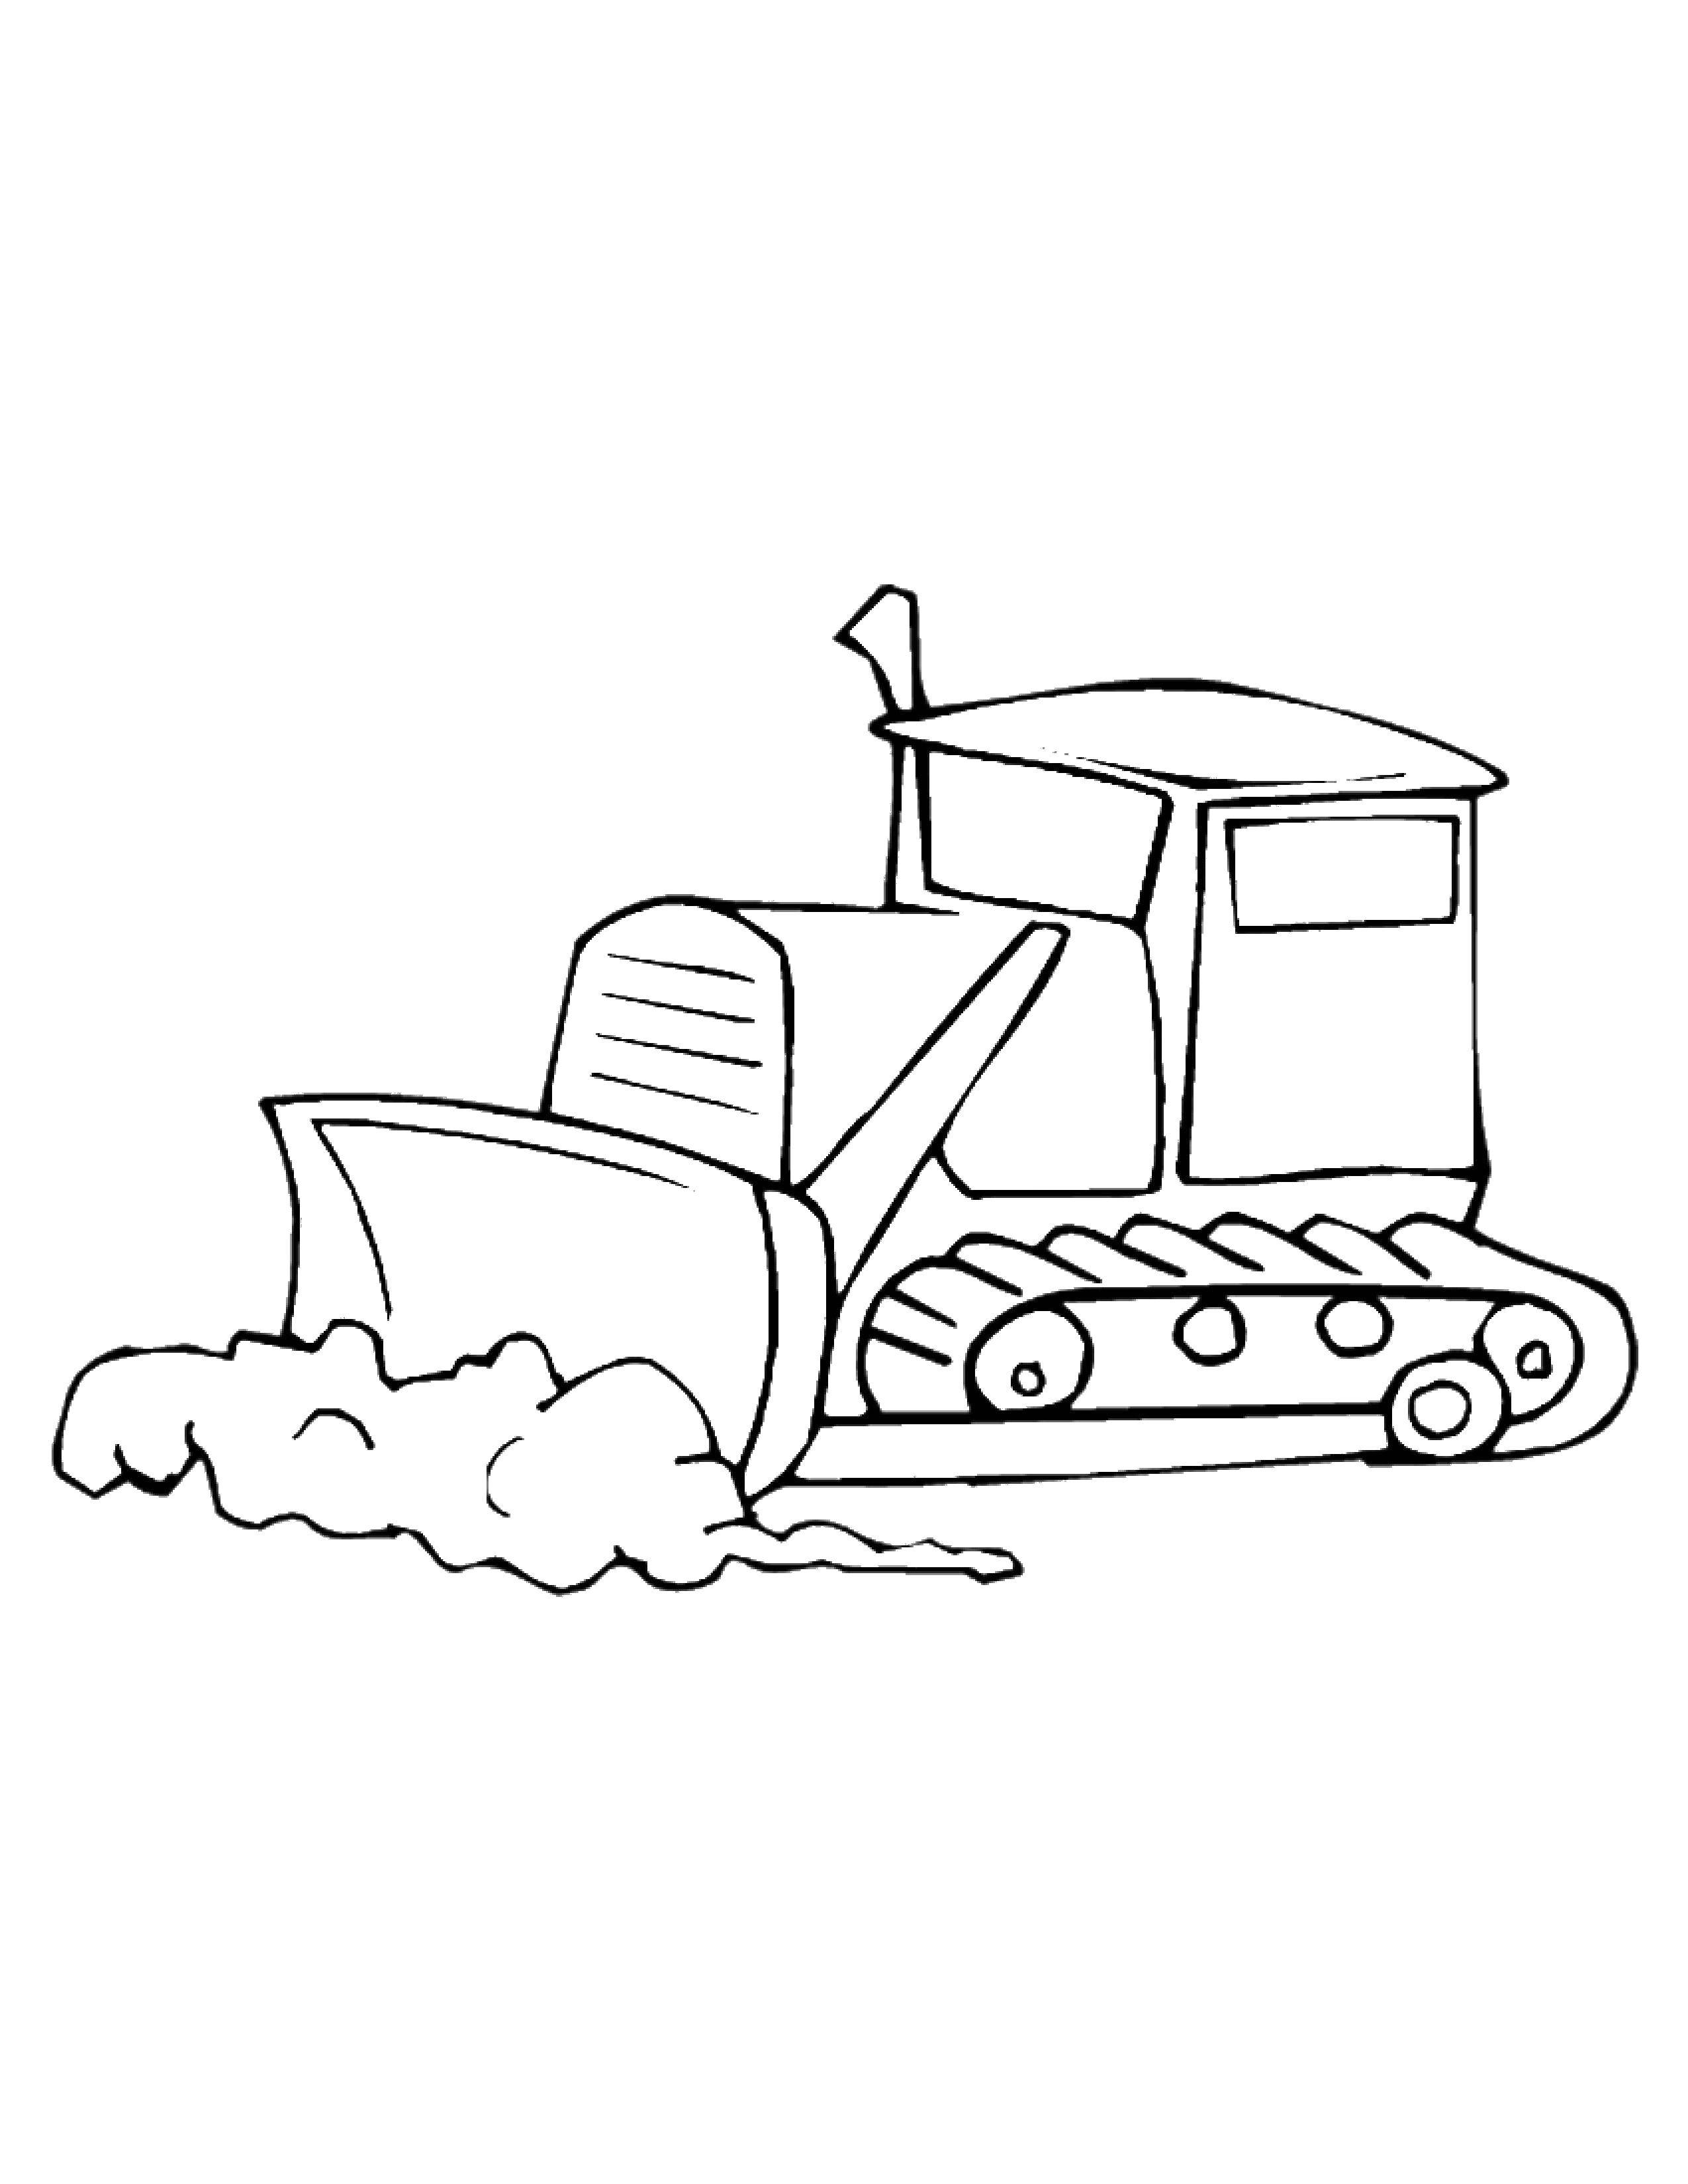 Coloring Tractor and earth. Category machine . Tags:  the tractor, bucket, earth.